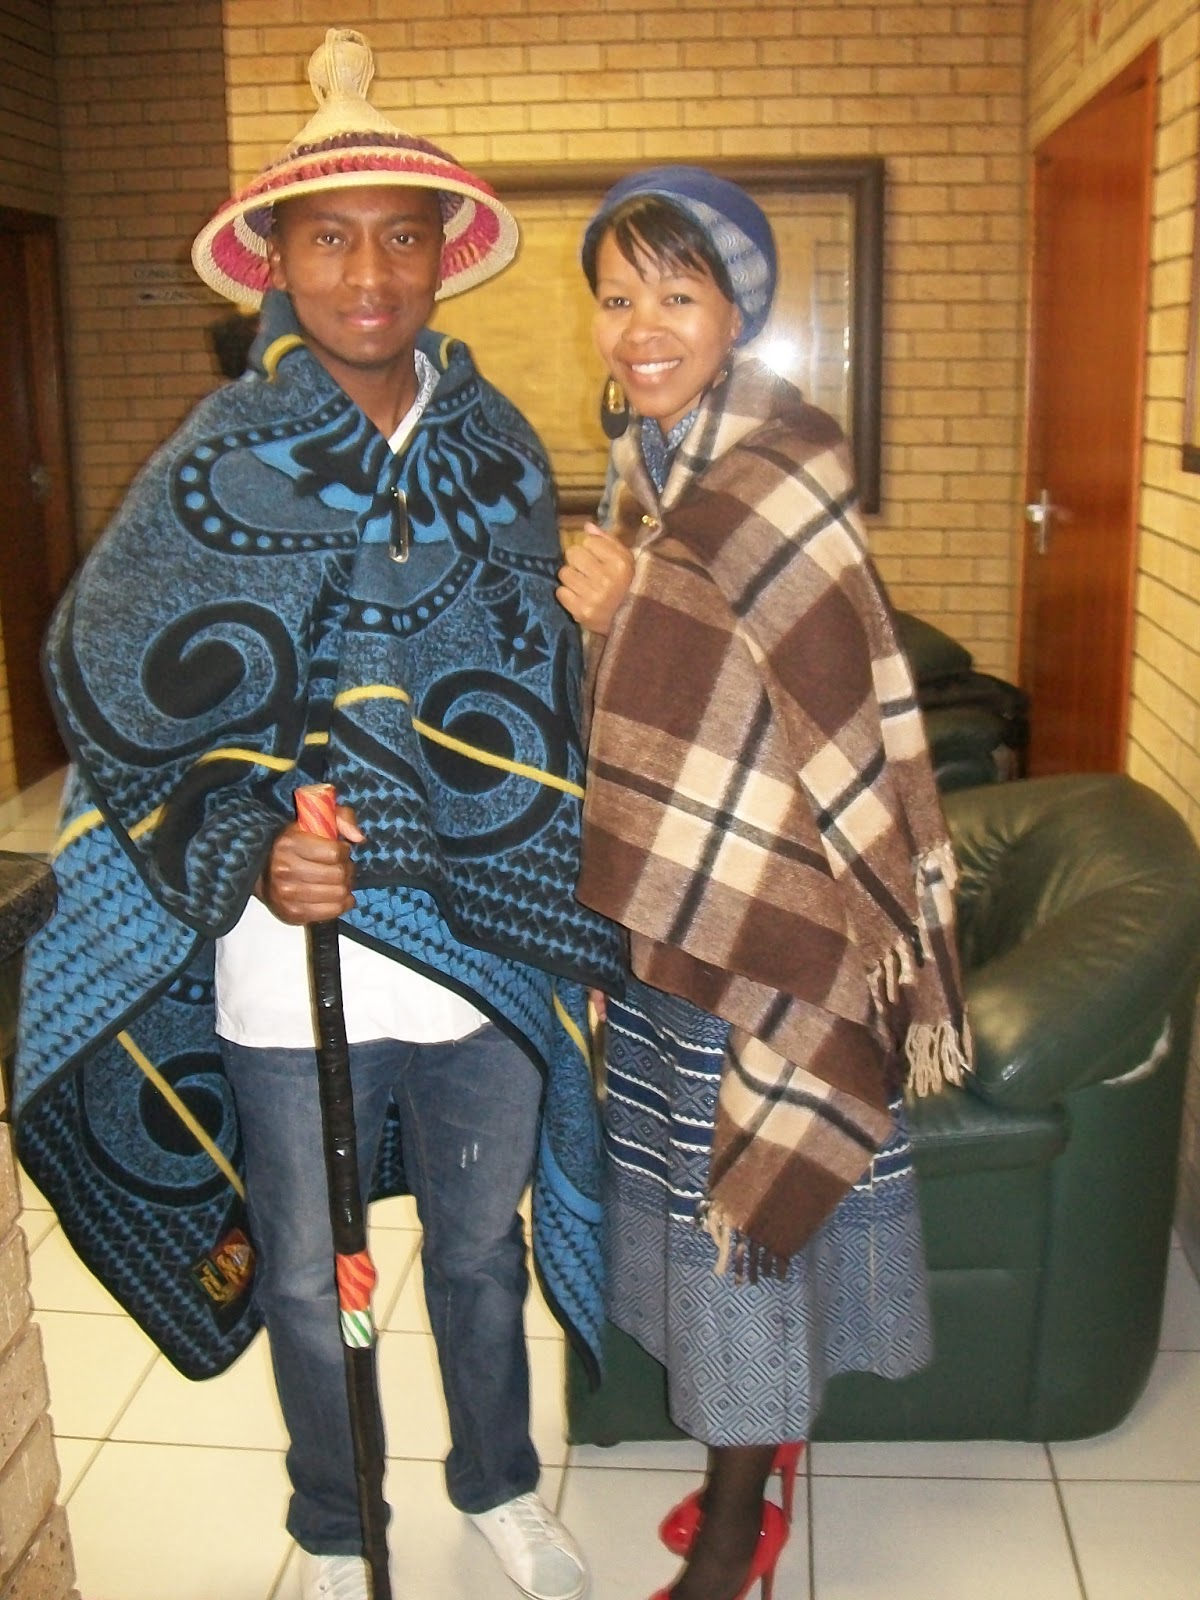 Xhosa boy wearing an Ingcawe blanket (known by the black 